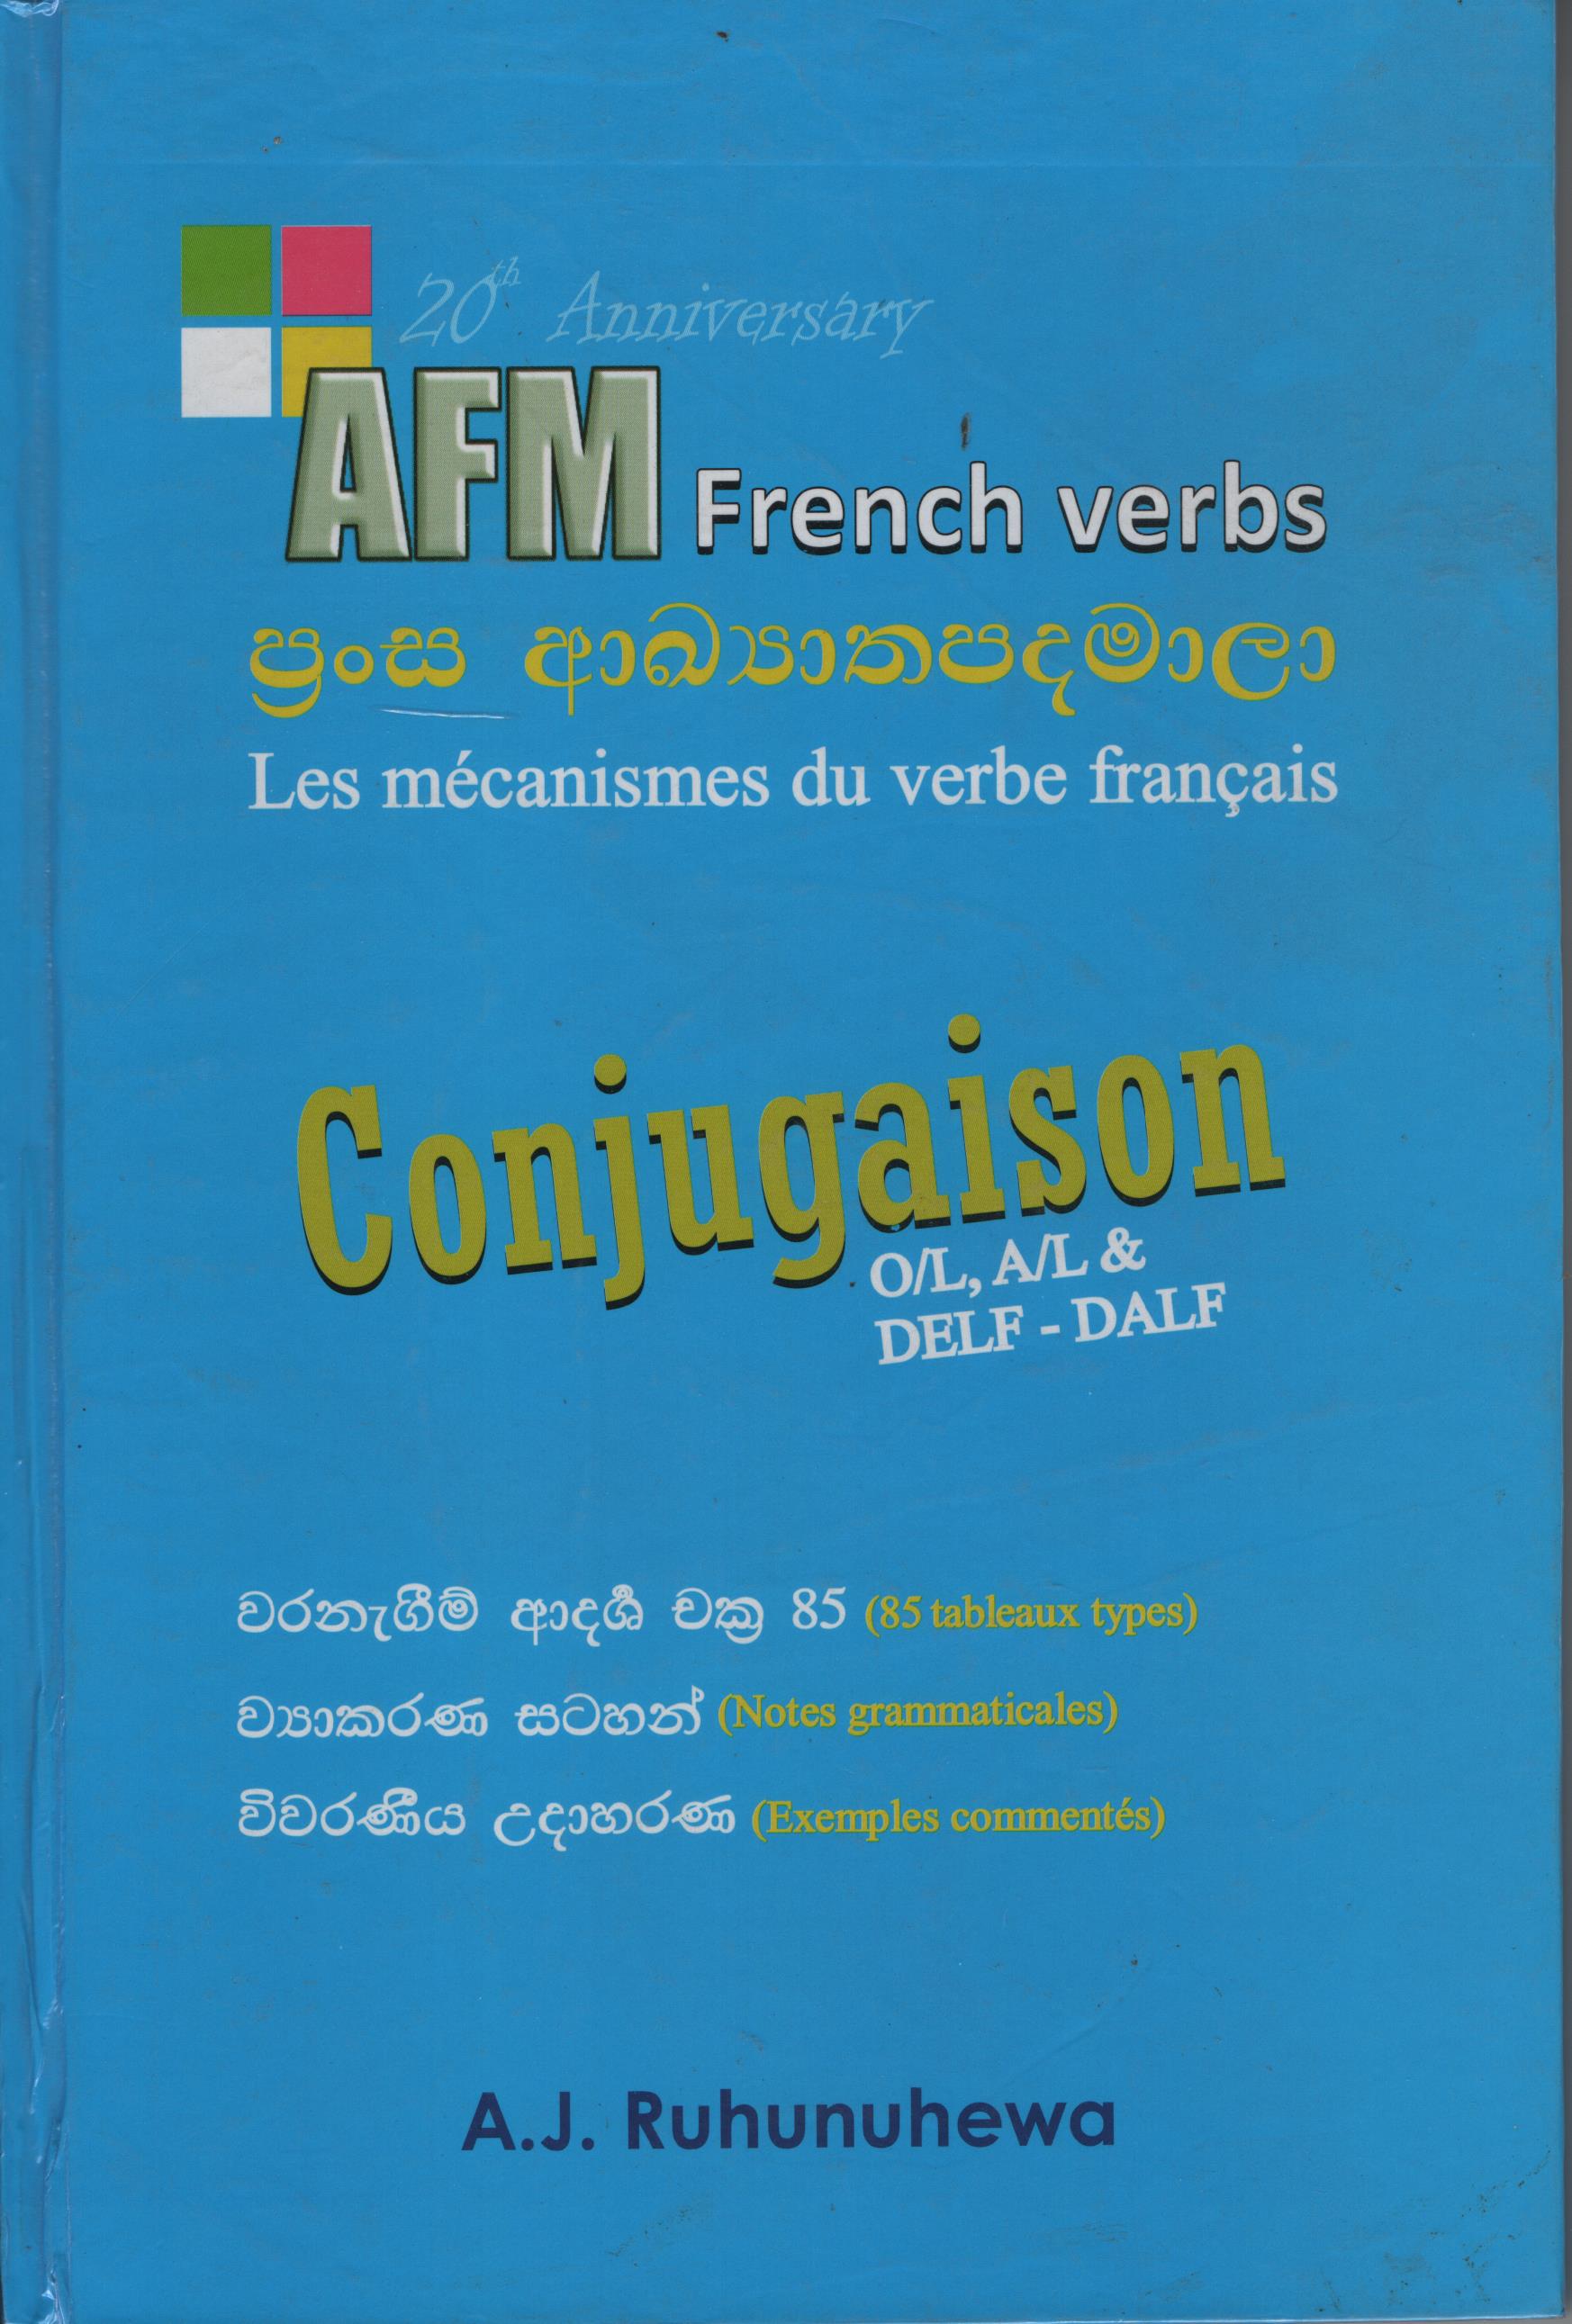 AFM French Verbs 